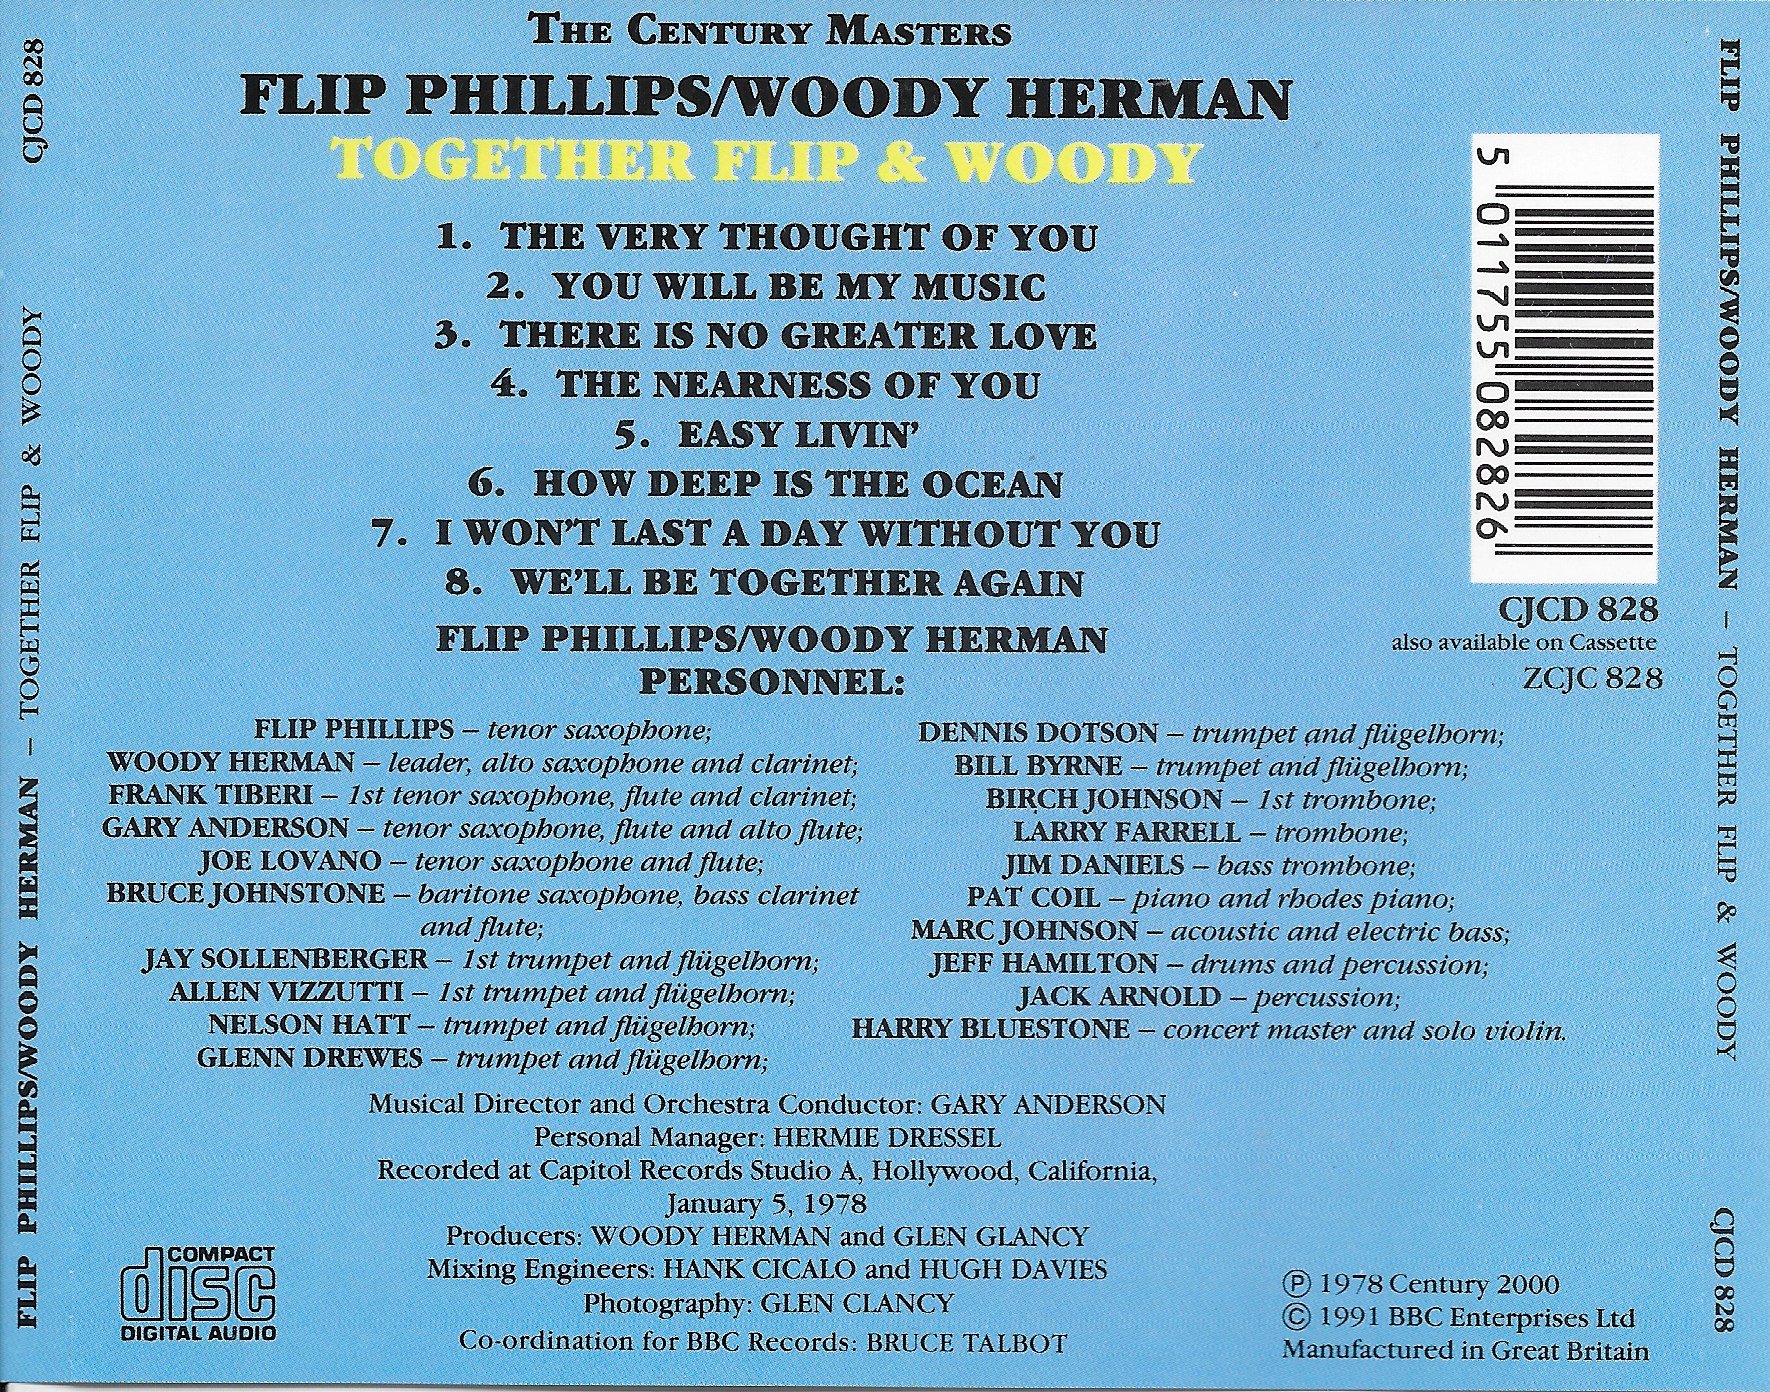 Picture of CJCD 828 The Century Catalogue - Together Flip & Woody by artist Flip Phillips / Woody Herman from the BBC records and Tapes library